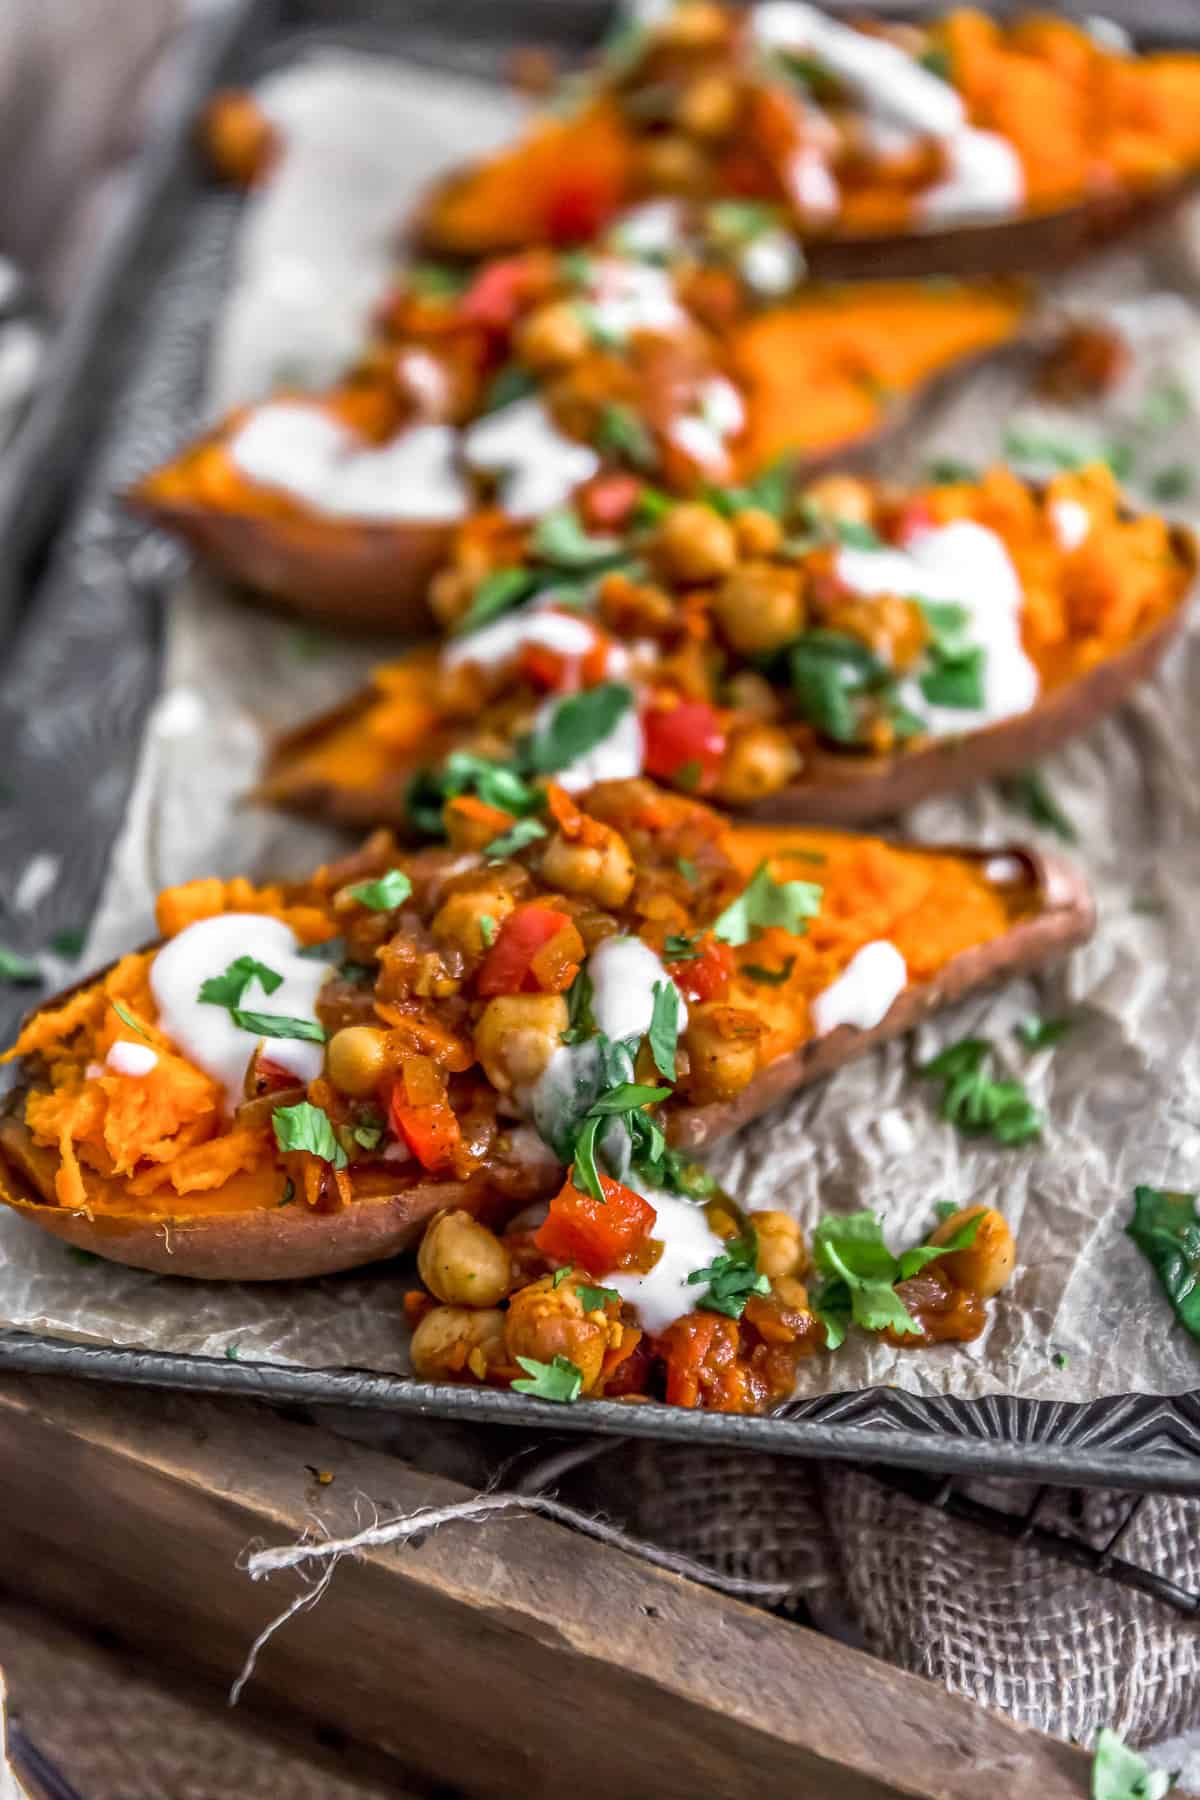 Moroccan Spiced Chickpeas and Garlic Sauce over Sweet Potatoes